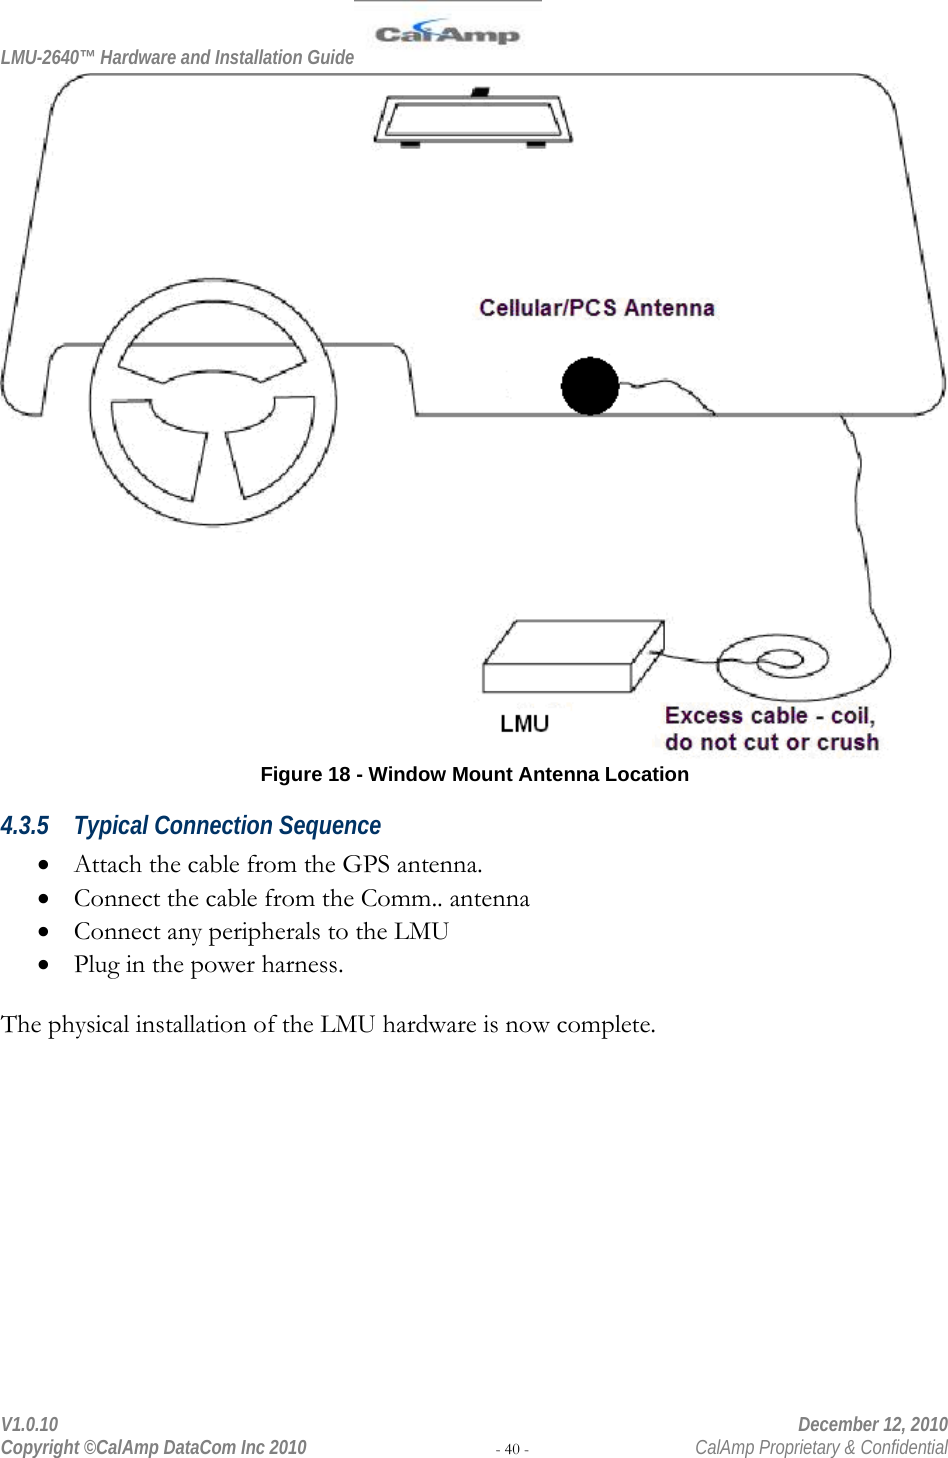 LMU-2640™ Hardware and Installation Guide  V1.0.10    December 12, 2010 Copyright ©CalAmp DataCom Inc 2010 - 40 -  CalAmp Proprietary &amp; Confidential  Figure 18 - Window Mount Antenna Location 4.3.5 Typical Connection Sequence  Attach the cable from the GPS antenna.  Connect the cable from the Comm.. antenna  Connect any peripherals to the LMU  Plug in the power harness.  The physical installation of the LMU hardware is now complete. 